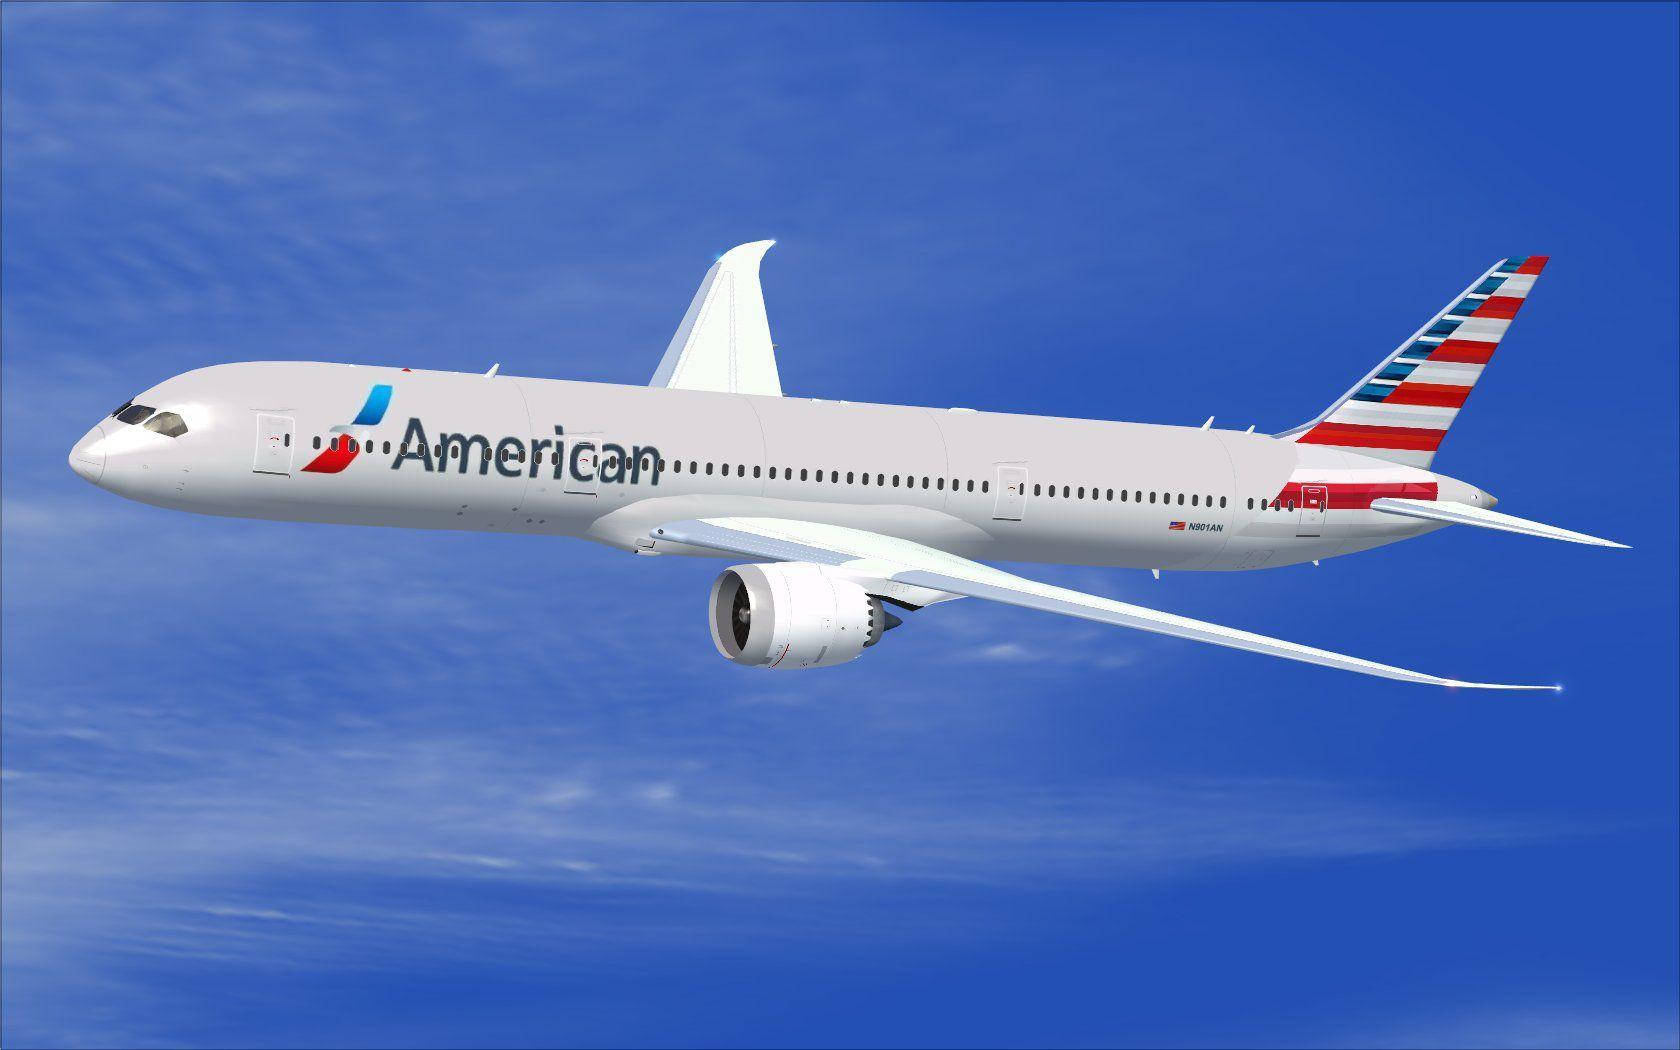 American Airlines Commercial Aircraft Background